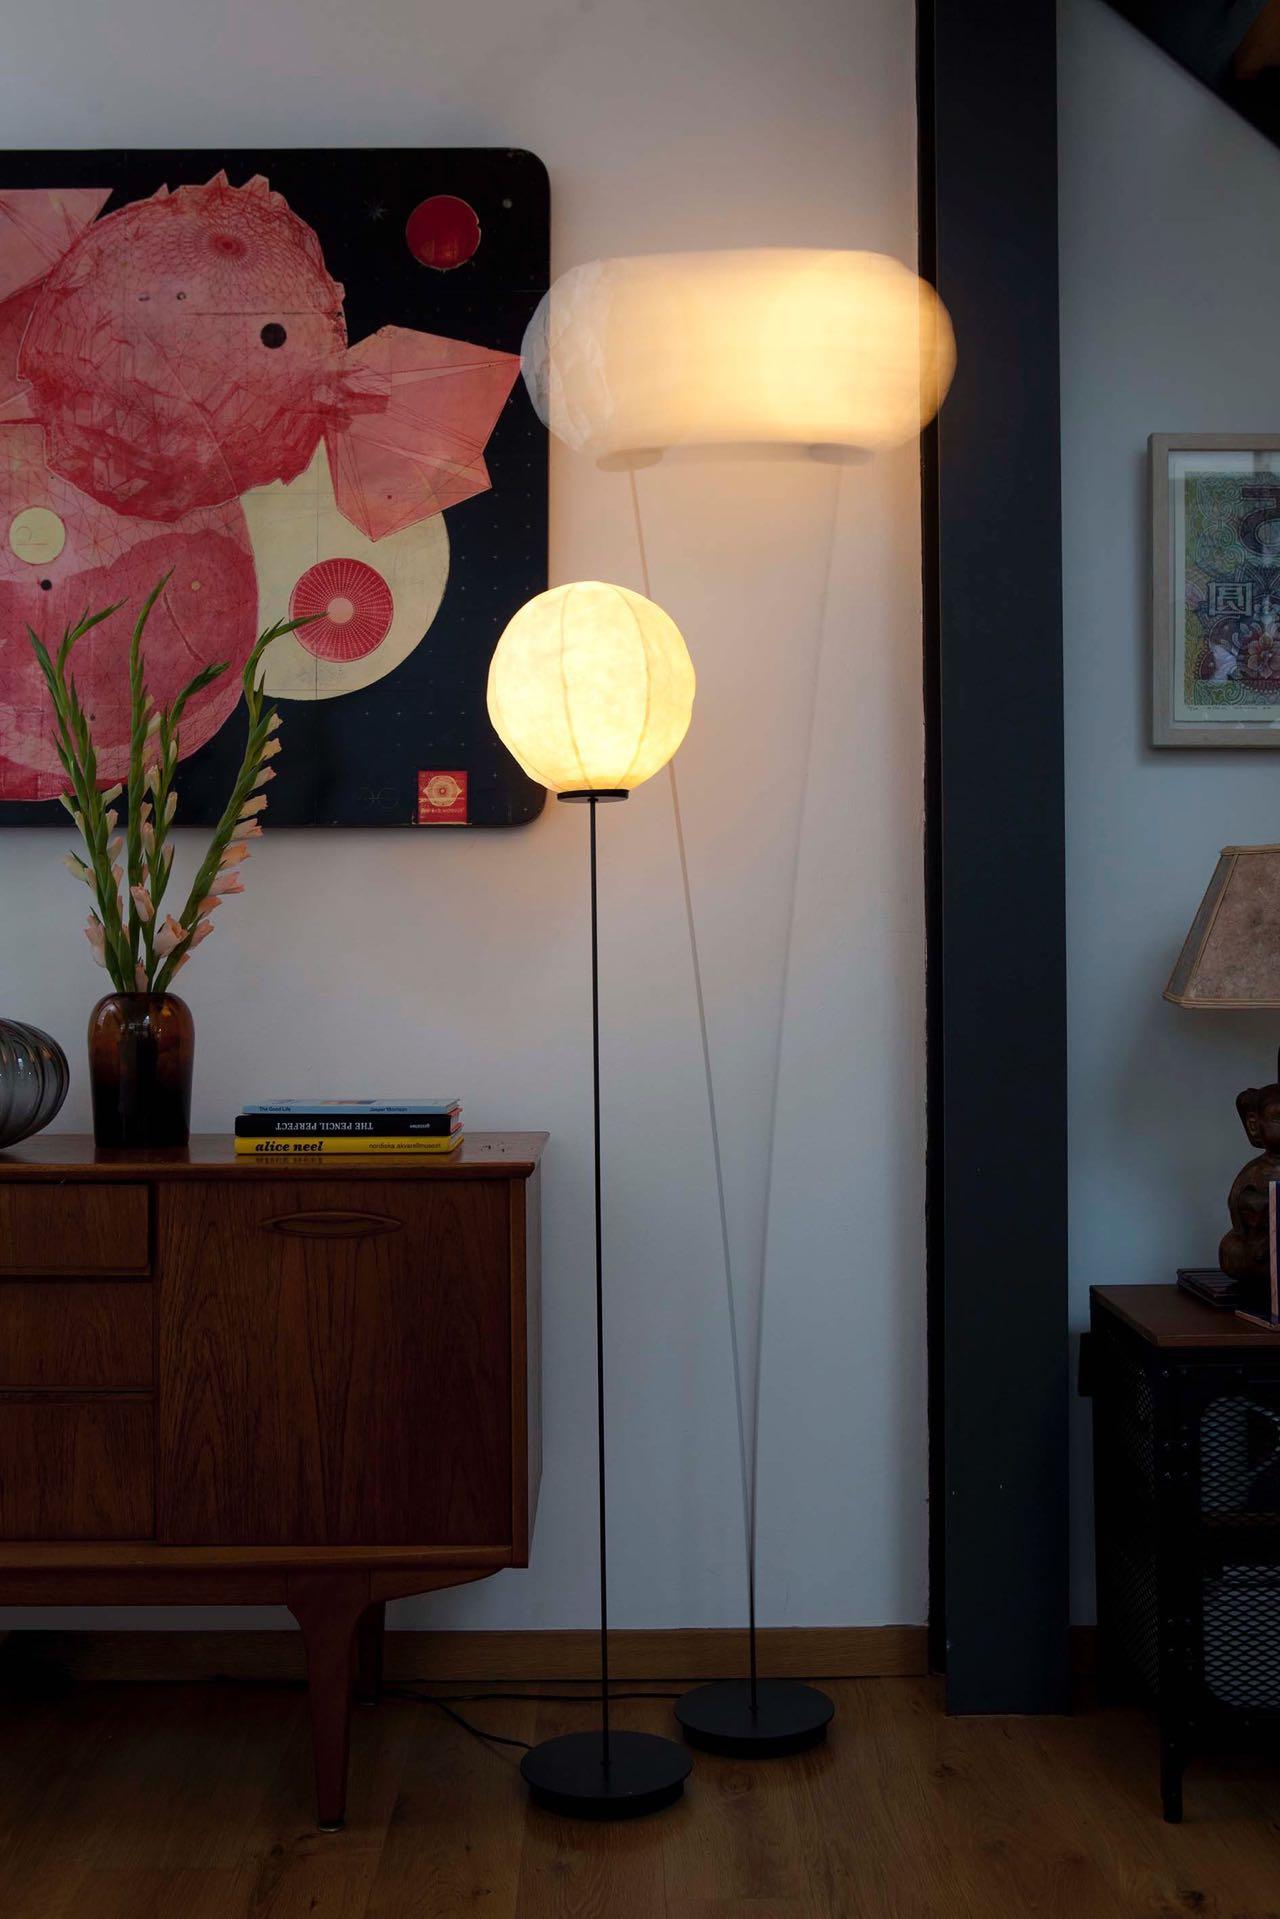 Cho light
A poetic floor lamp with a design made possible by cutting edge manufacturing techniques, Cho Light, by Swiss designer Dimitri Bähler, combines traditional Japanese Washi paper with a breathtakingly thin carbon-fibre rod. 
An extremely